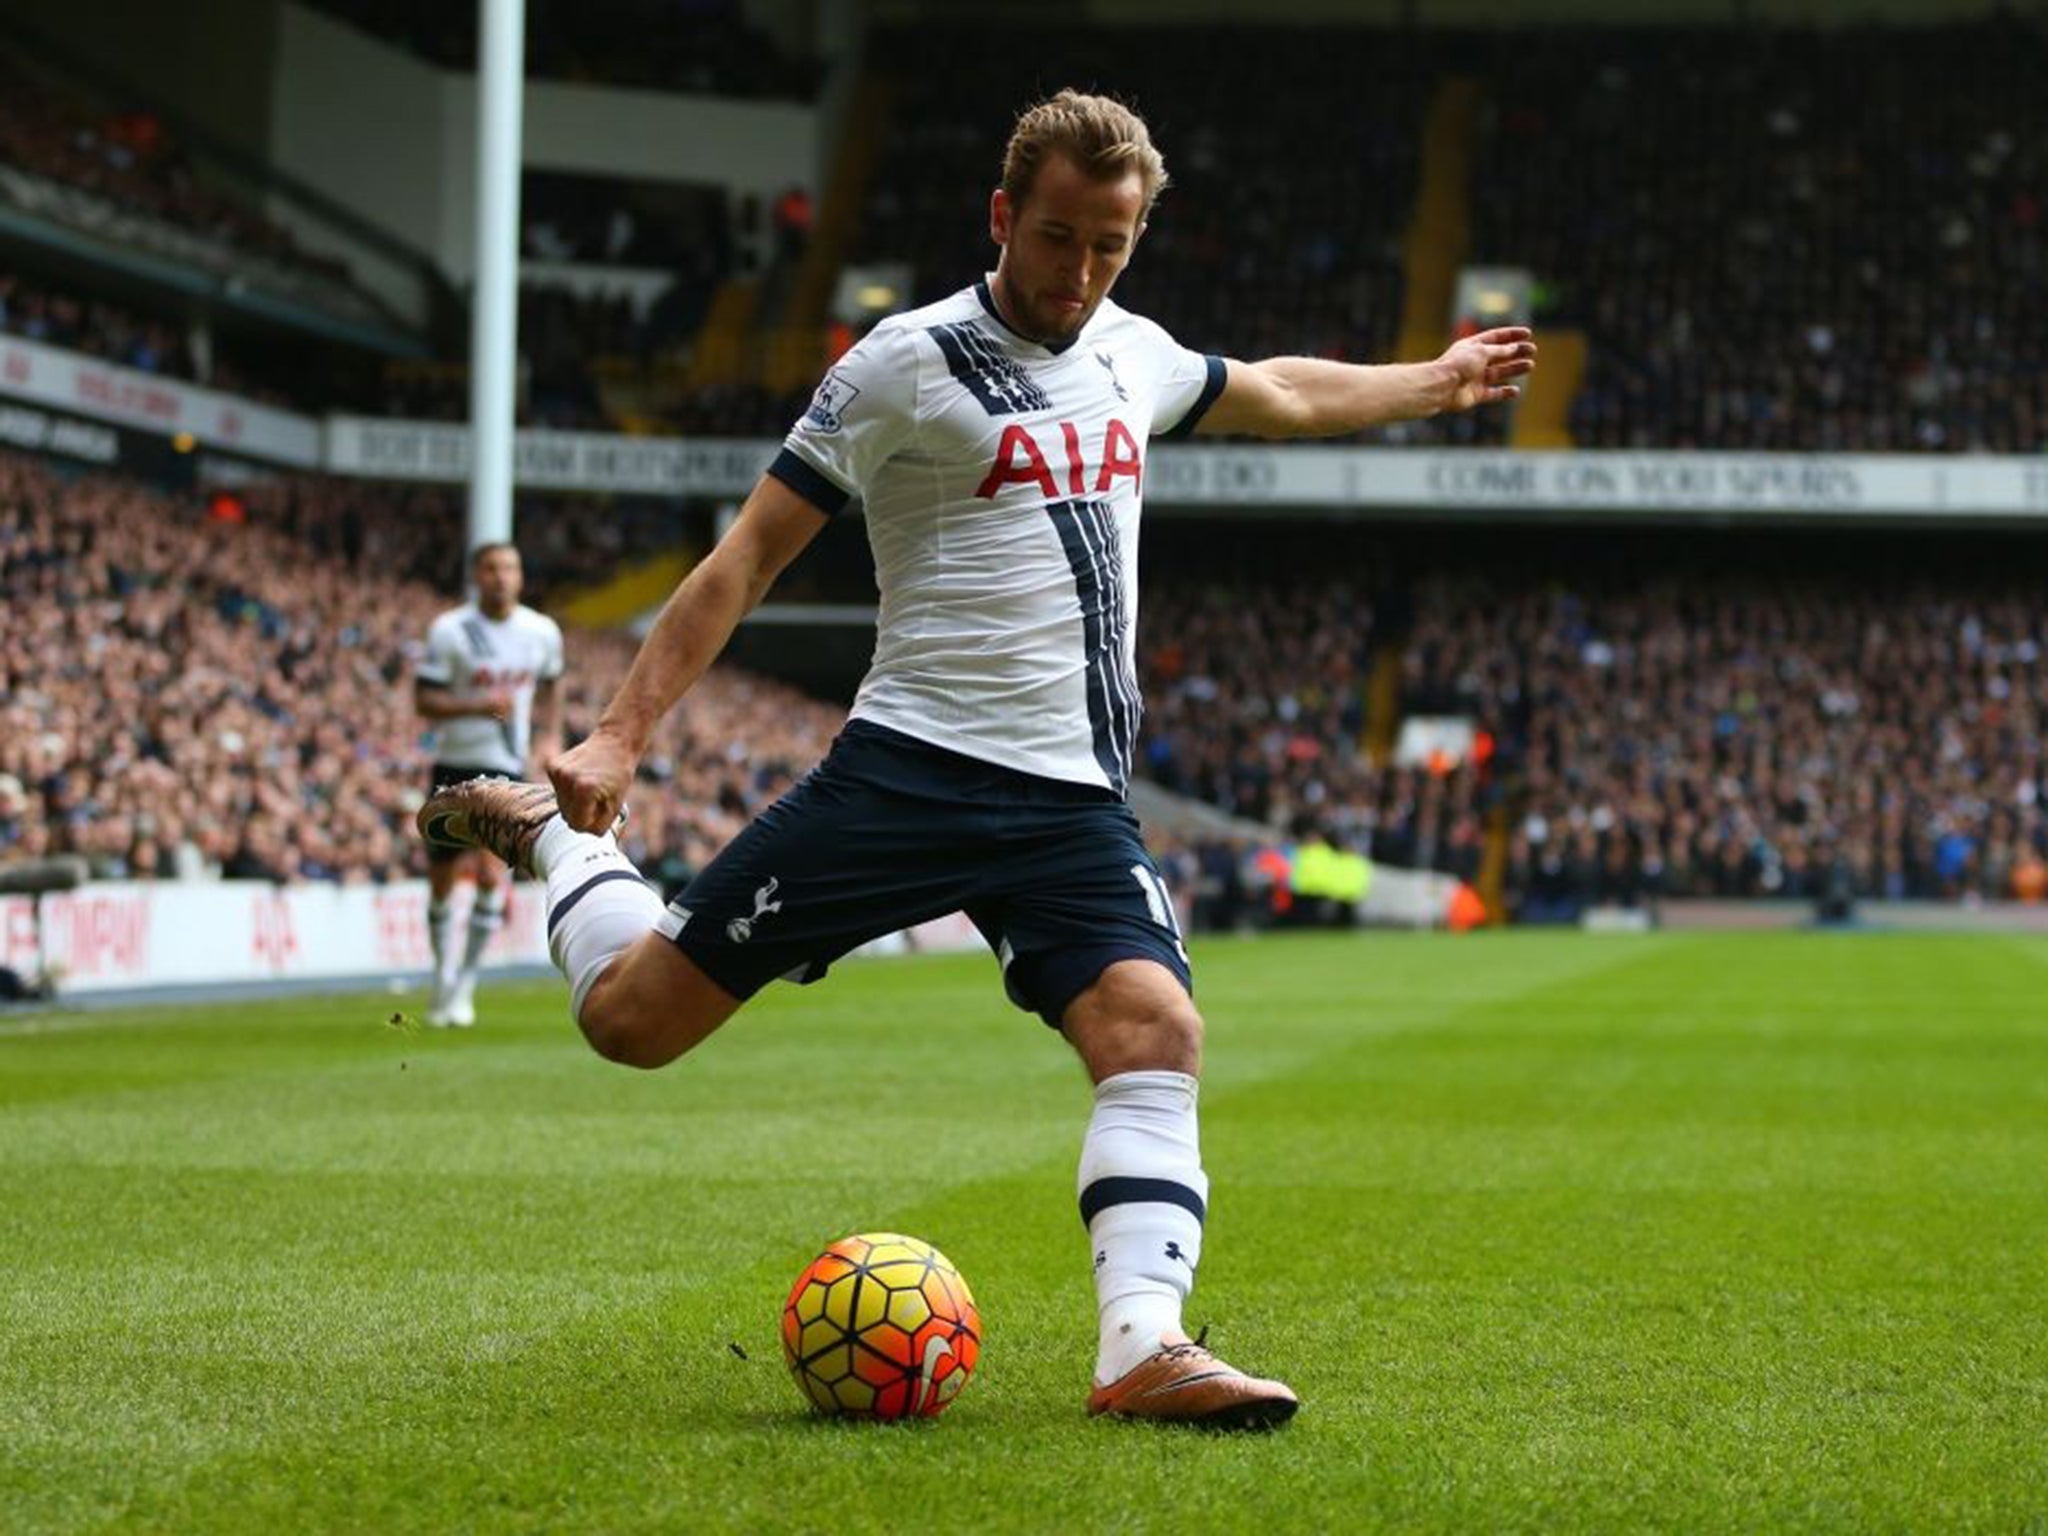 Harry Kane was described by the Tottenham manager, Mauricio Pochettino, as “a top-class player”